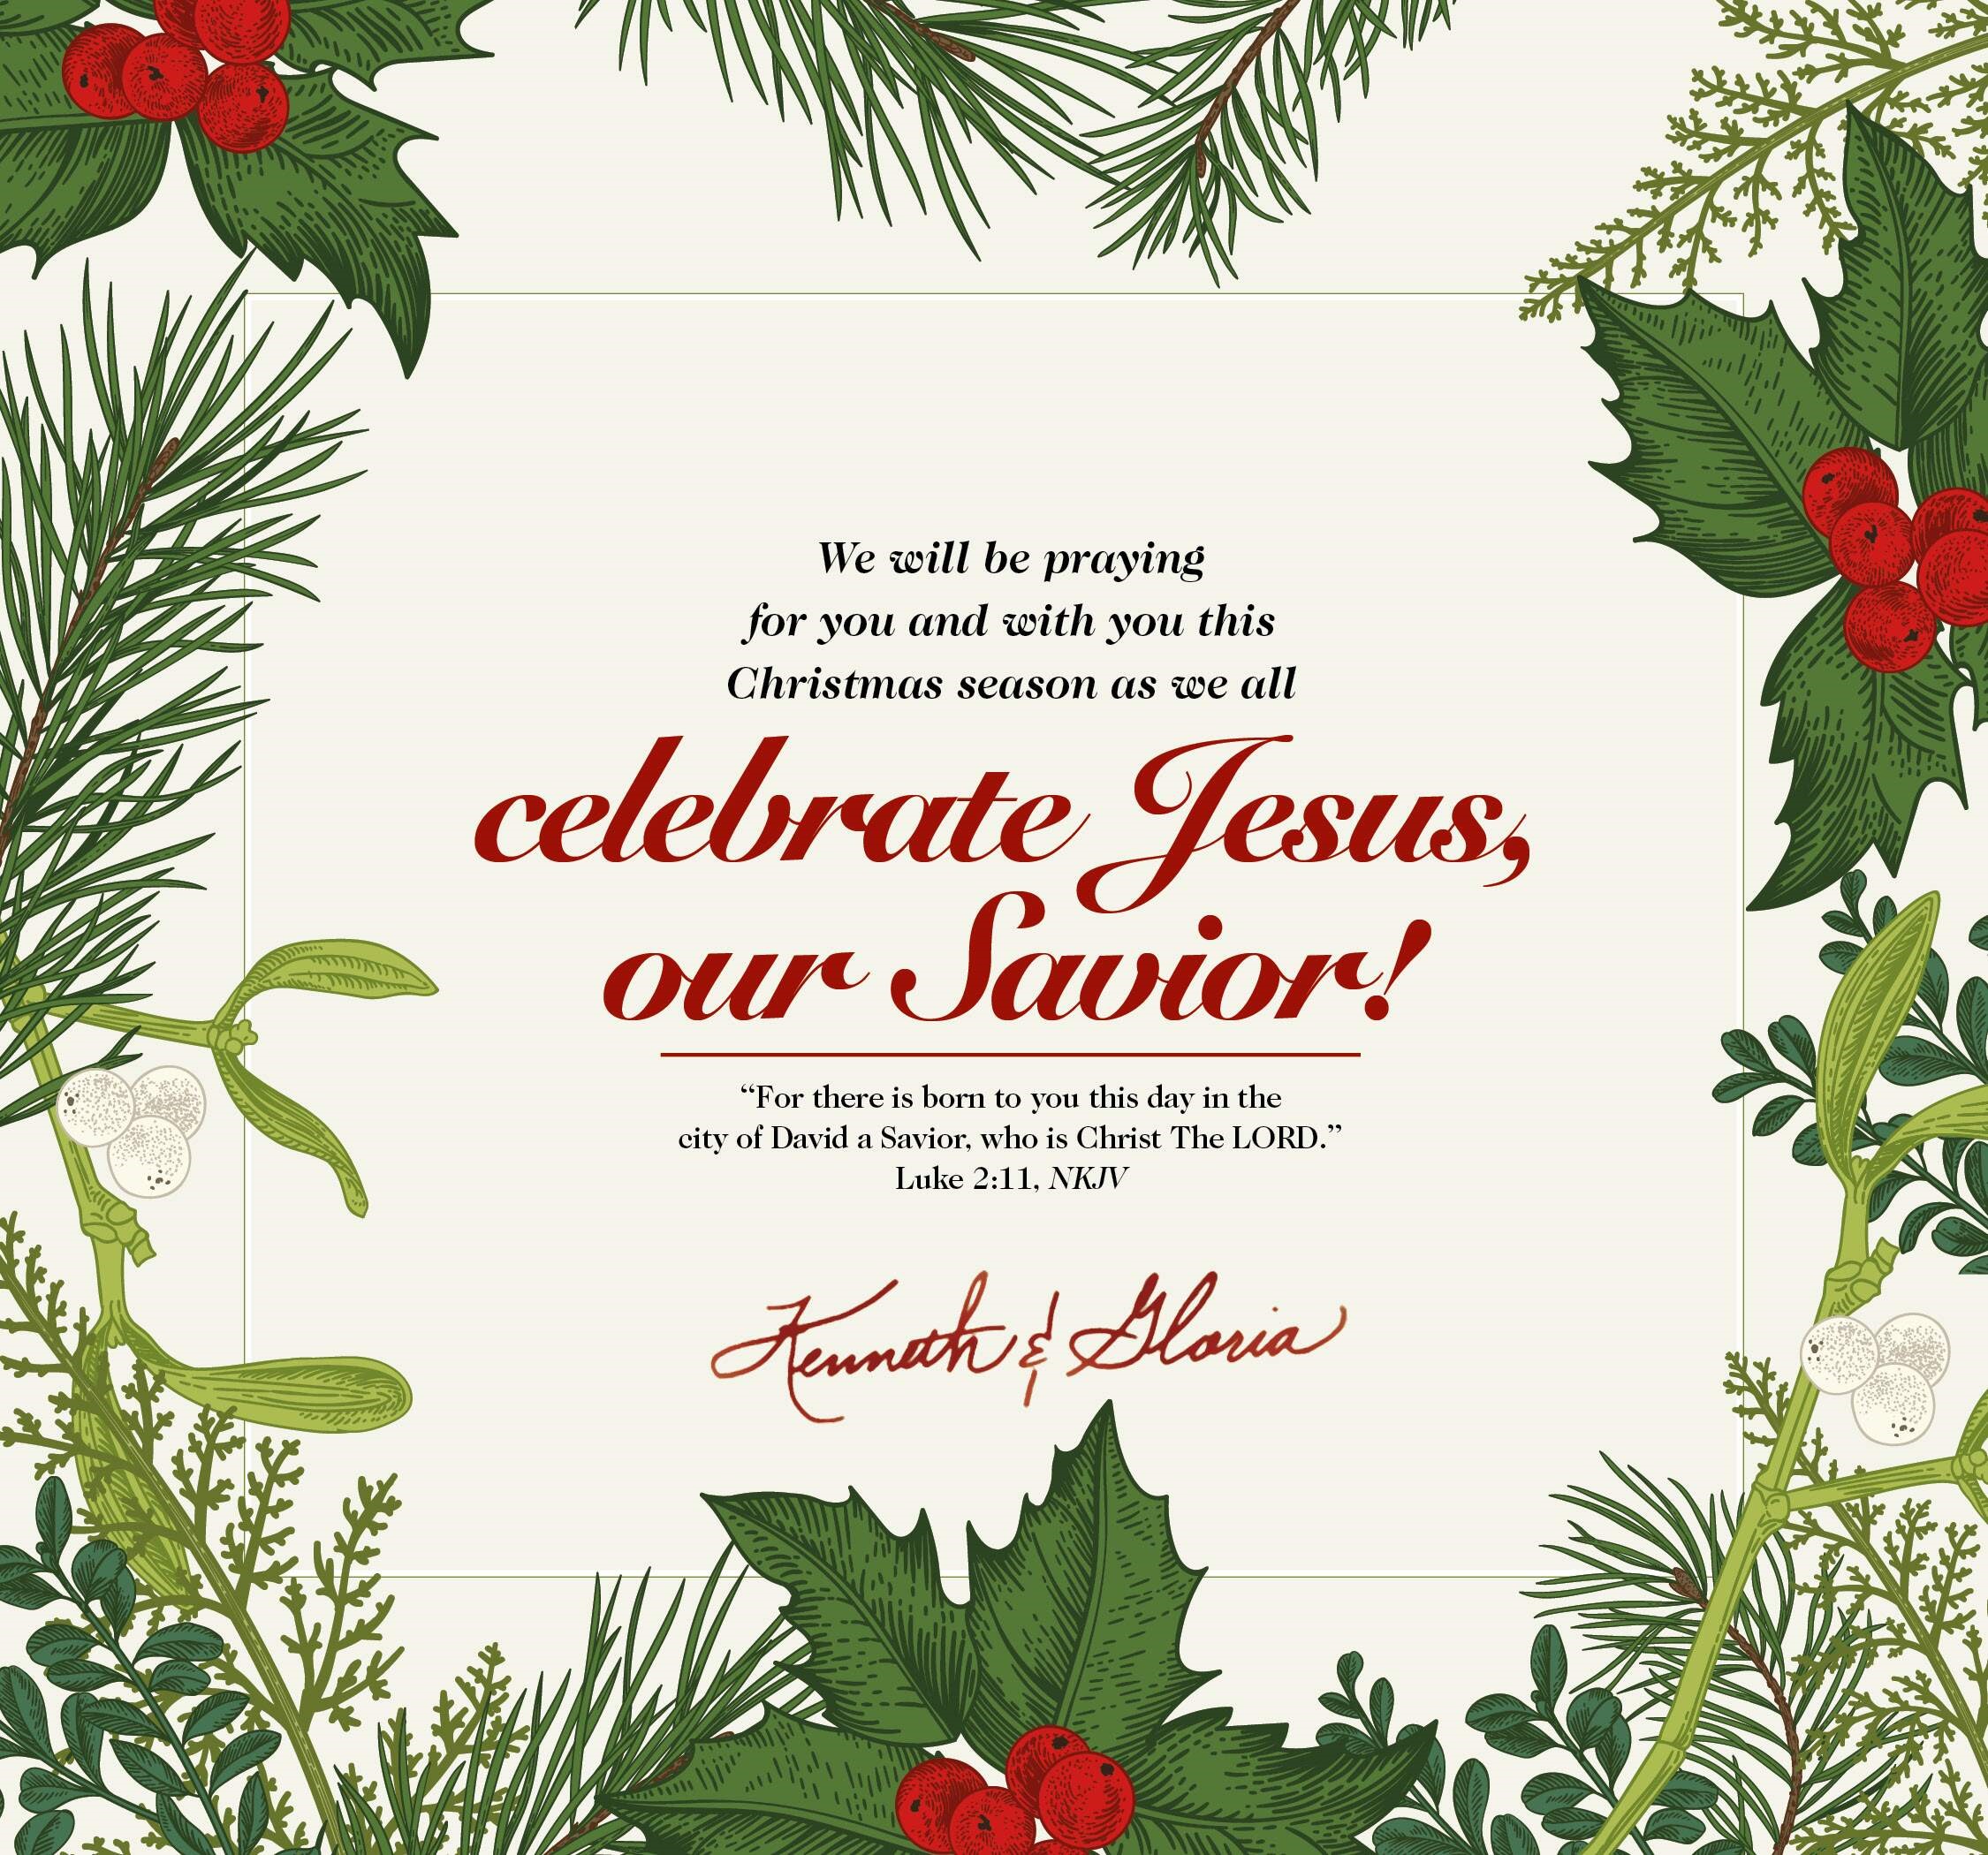 Merry Christmas from Kenneth and Gloria Copeland